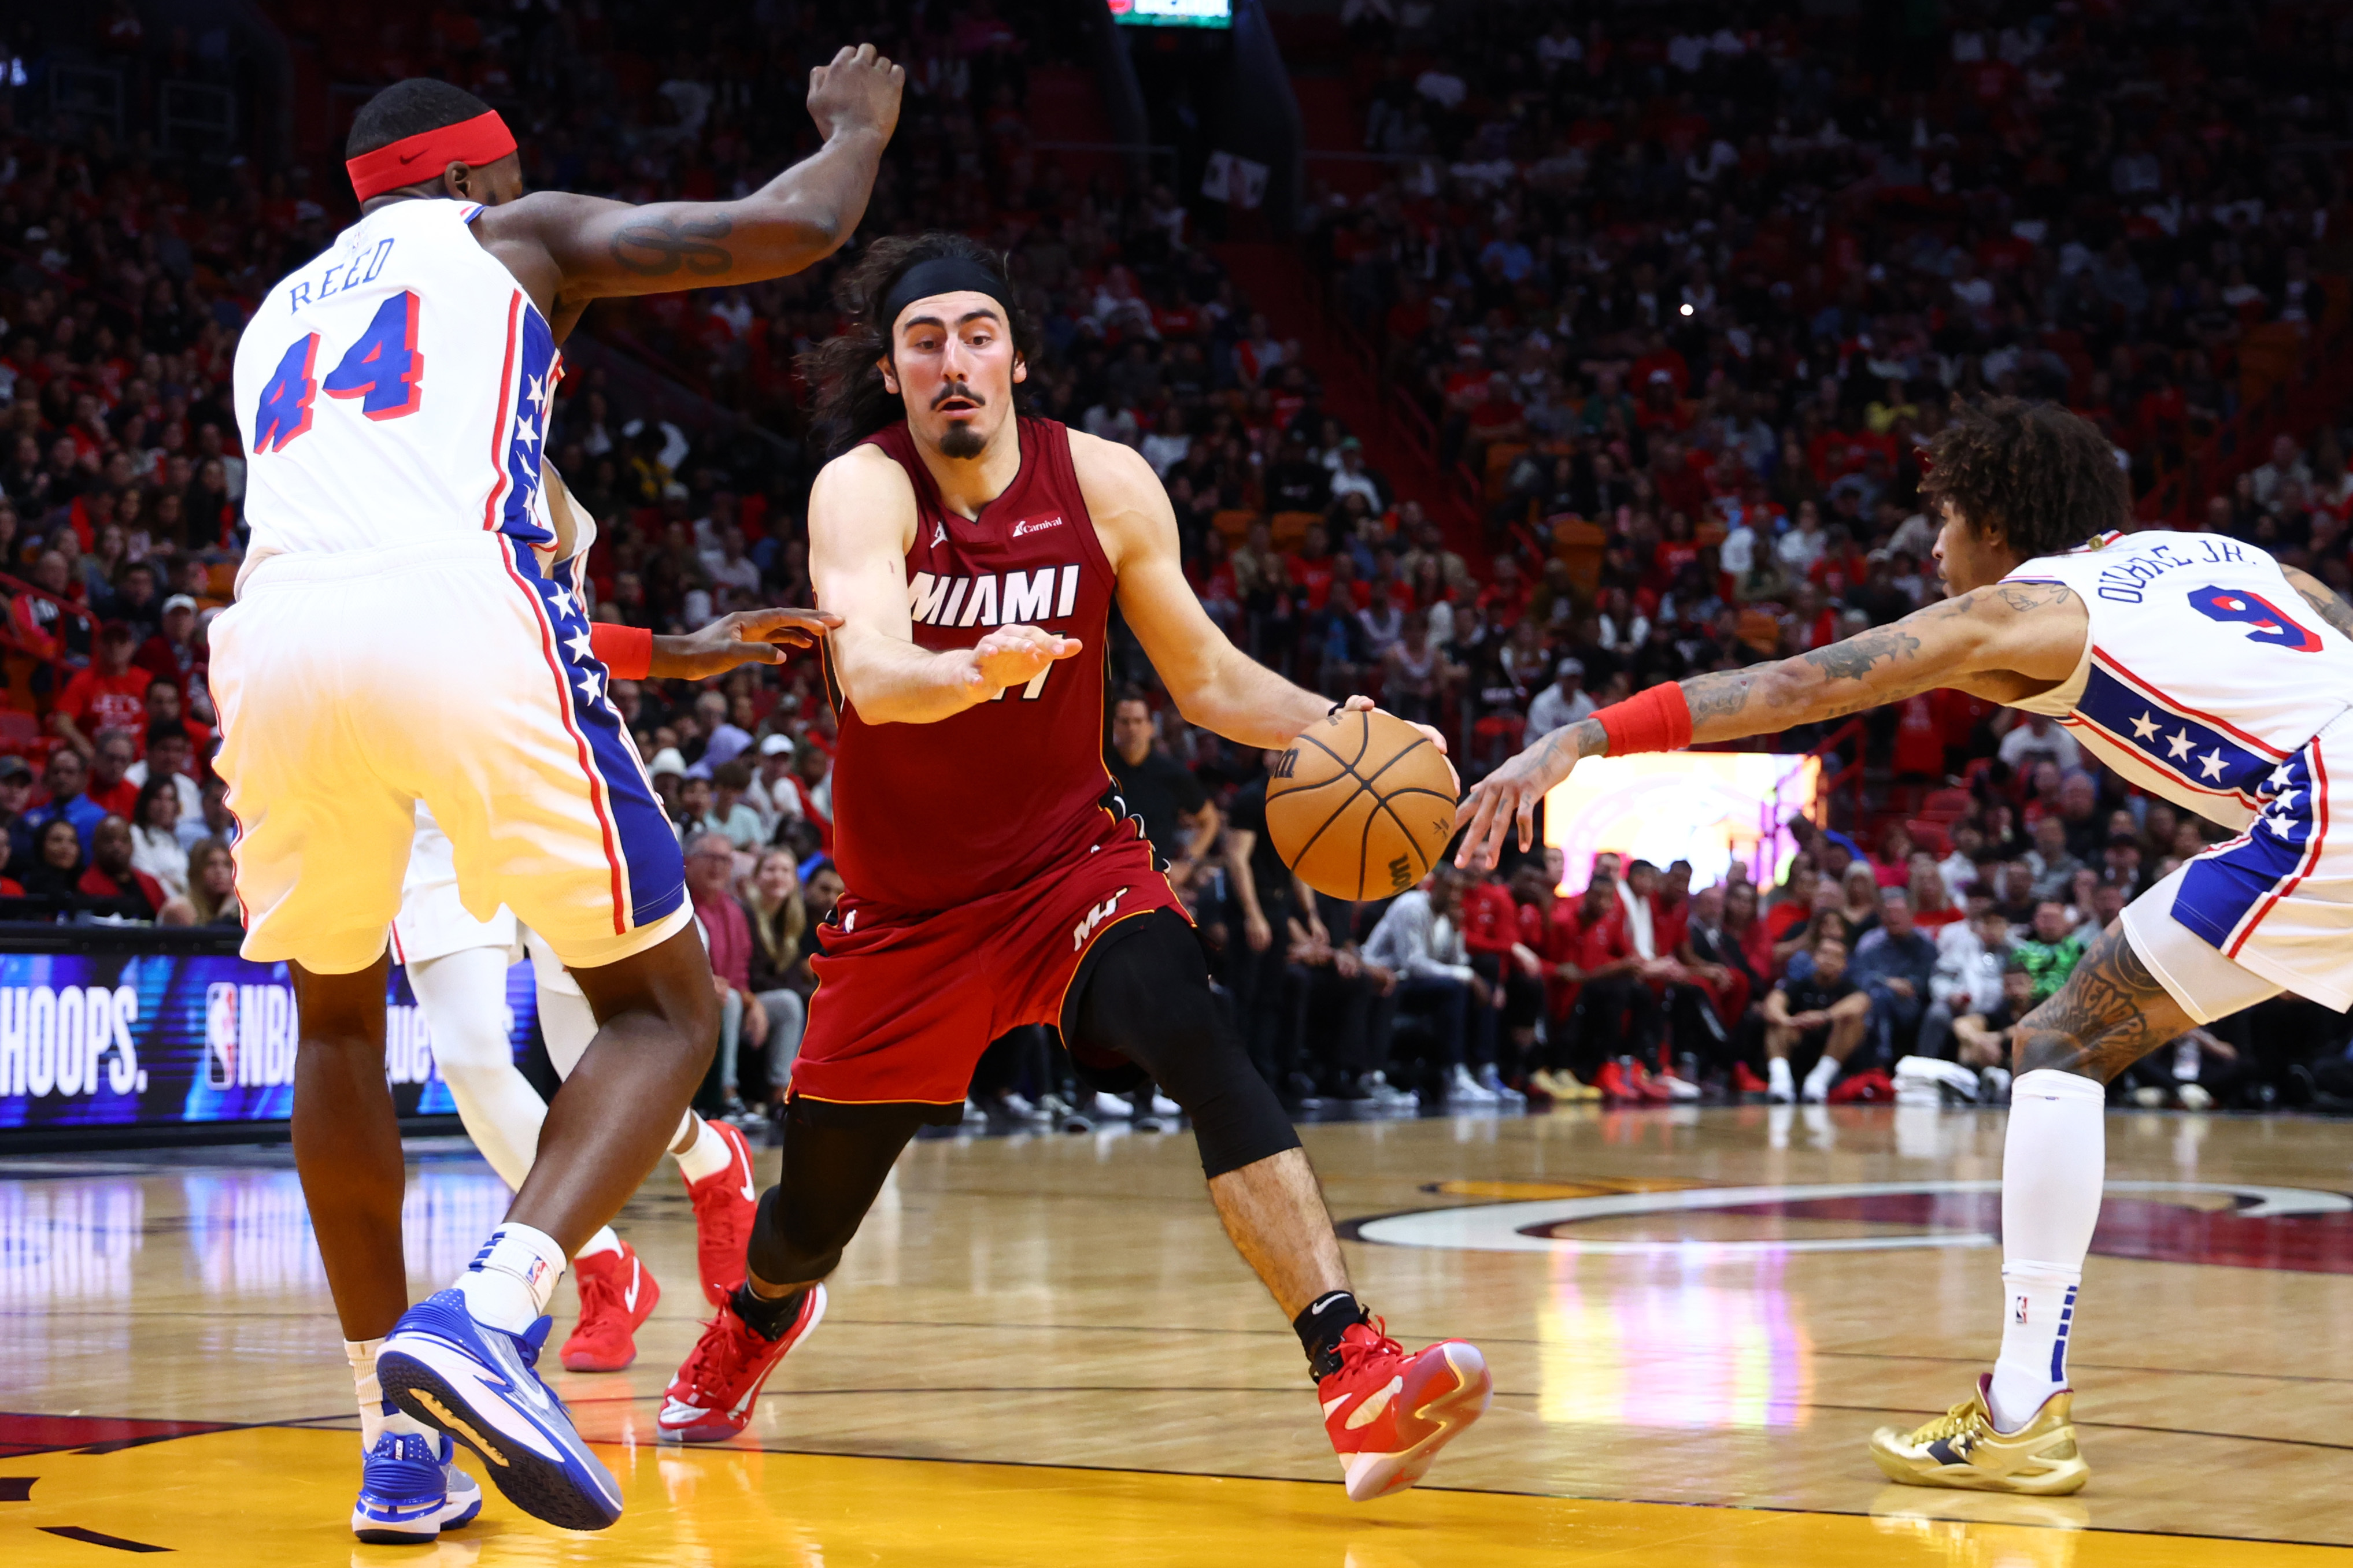 Hot Takes We Might Actually Believe: The Miami Heat will miss the